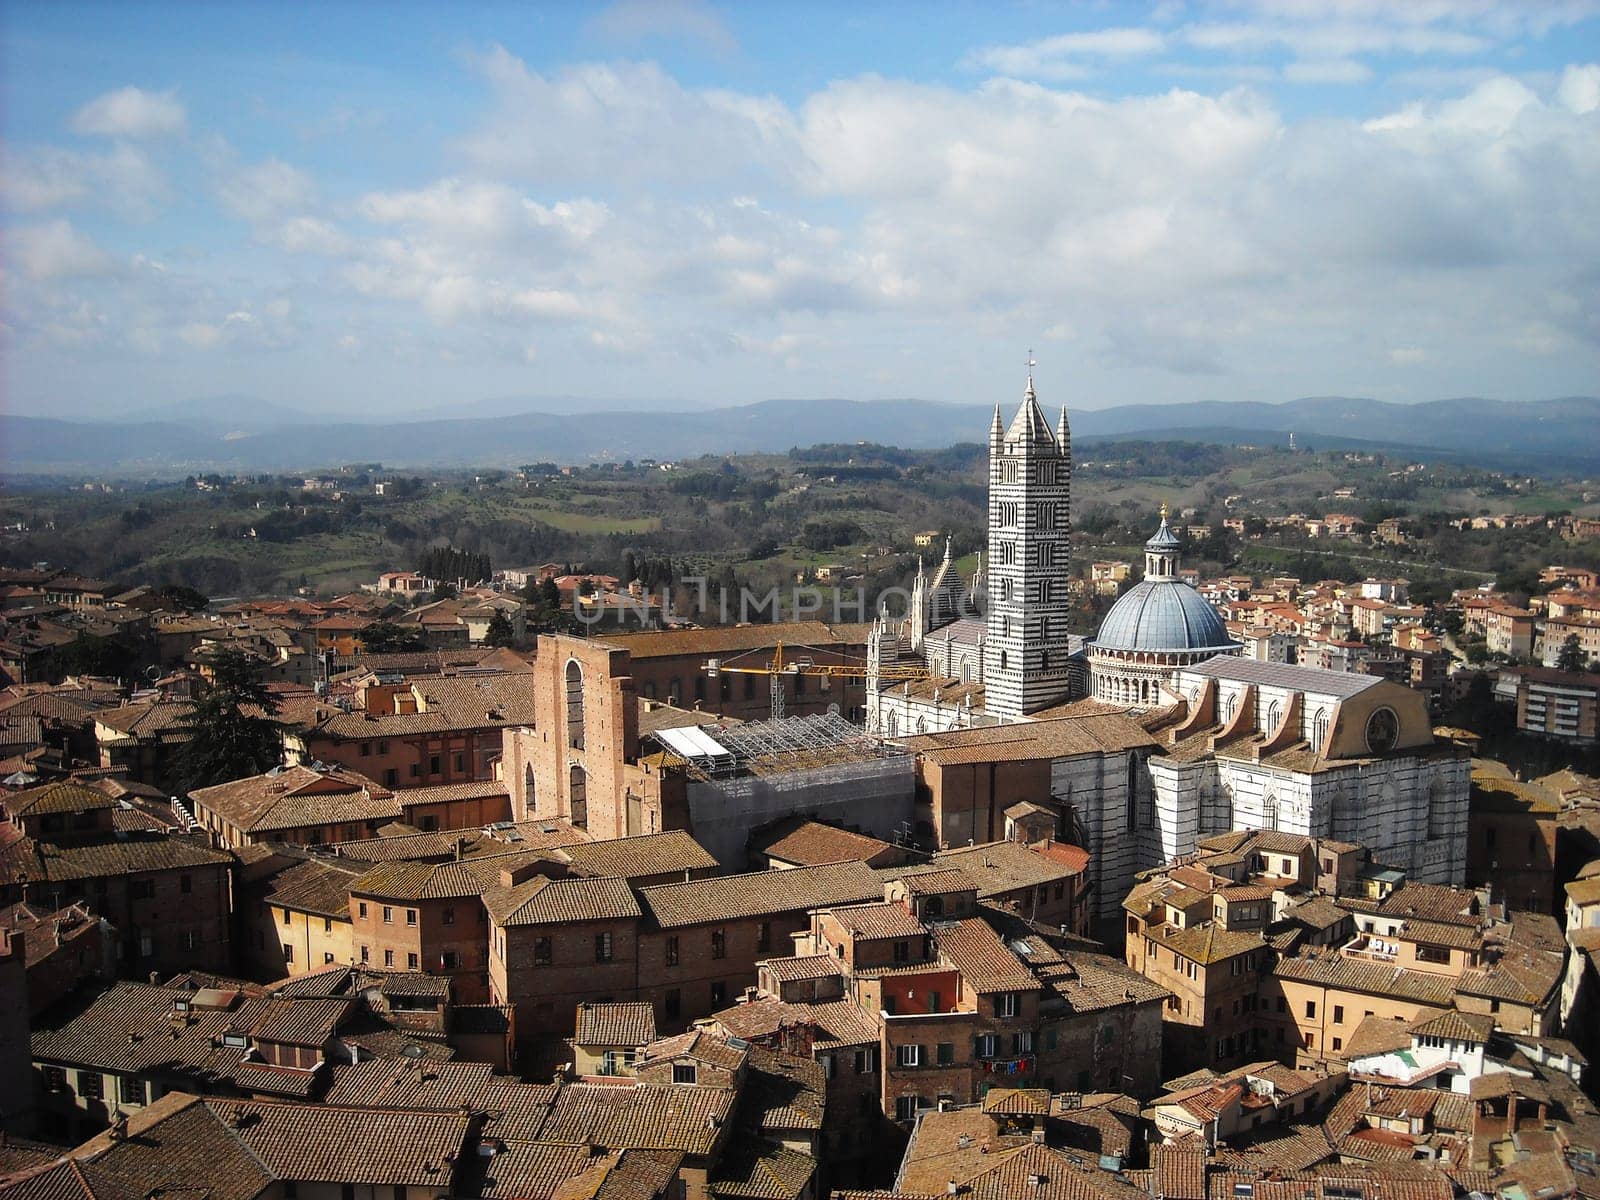 view of Siena, Tuscany, Italy by Giamplume